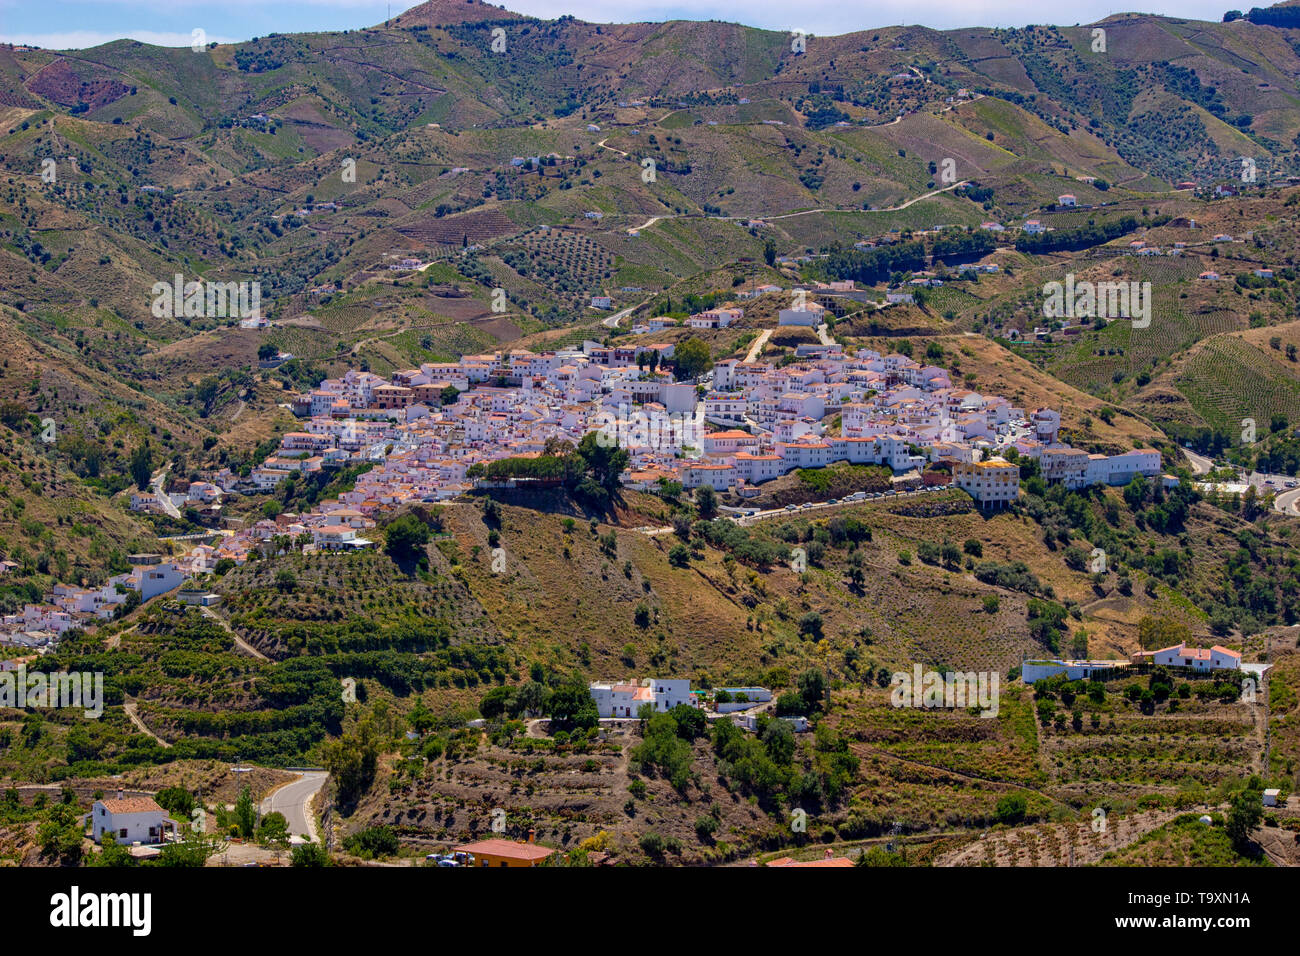 The town of Almáchar, in the province of Málaga, part of Andalusia in southern Spain shot from the mountains above, showing the traditional white wash Stock Photo